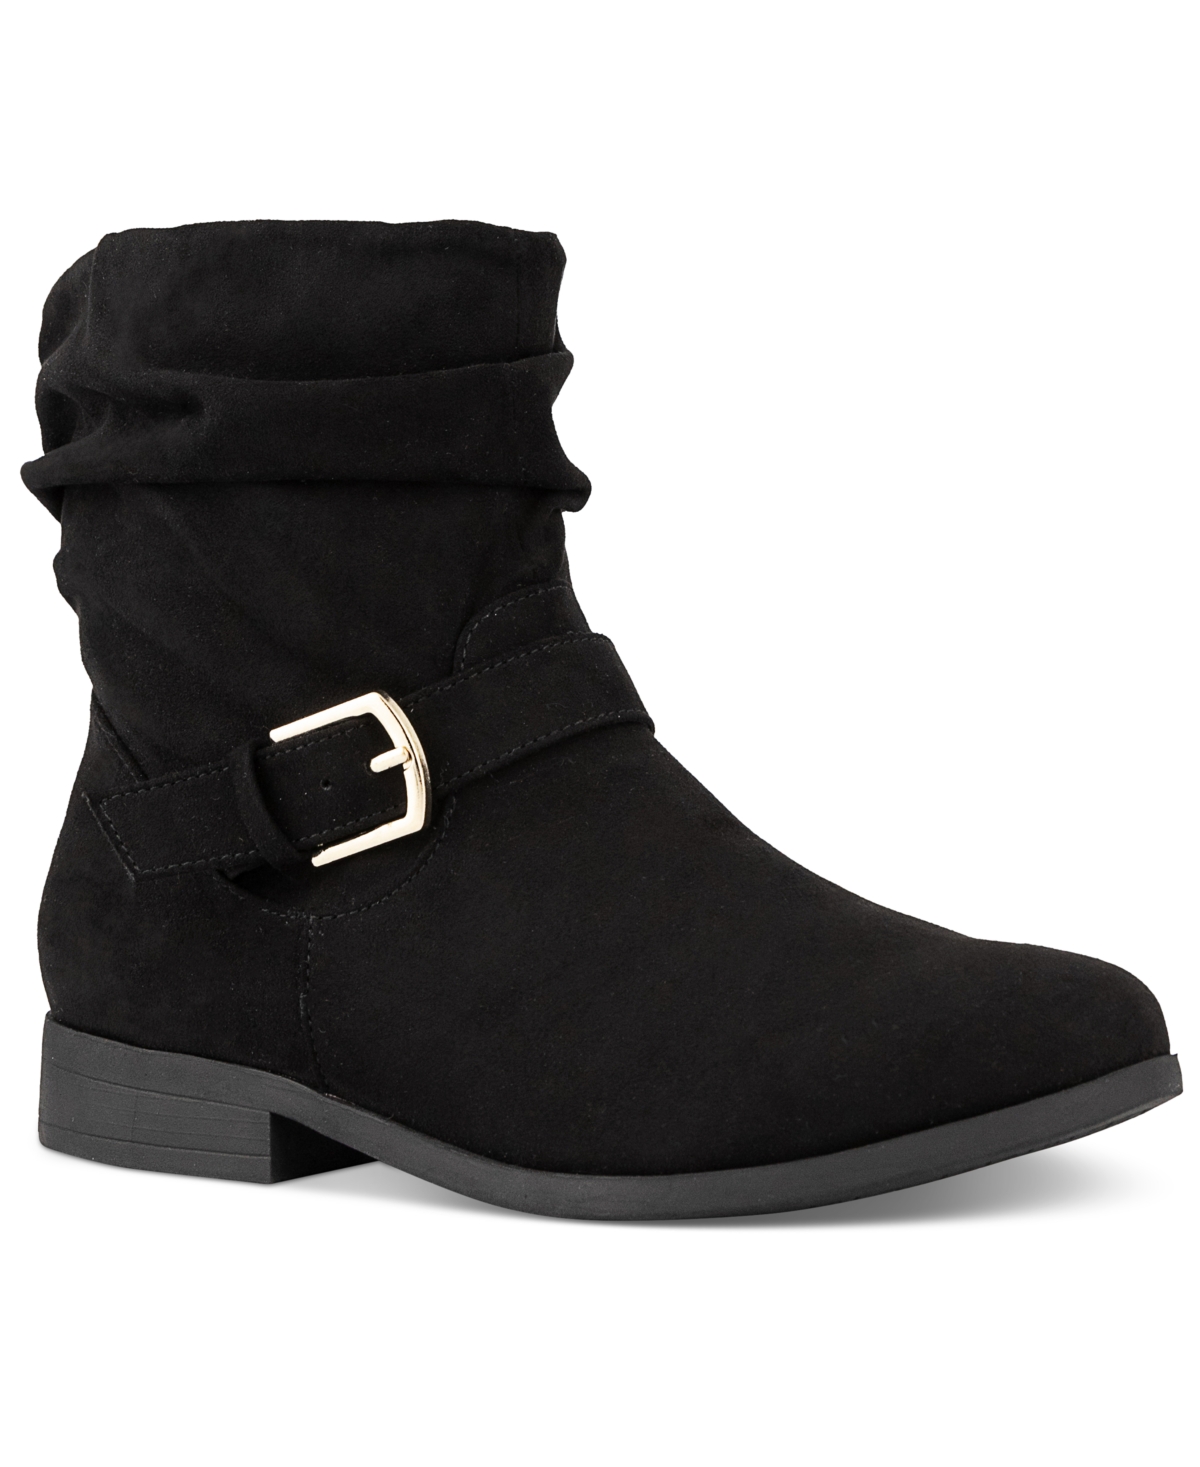 Clarett Slouch Buckled Booties, Created for Macy's - Grey